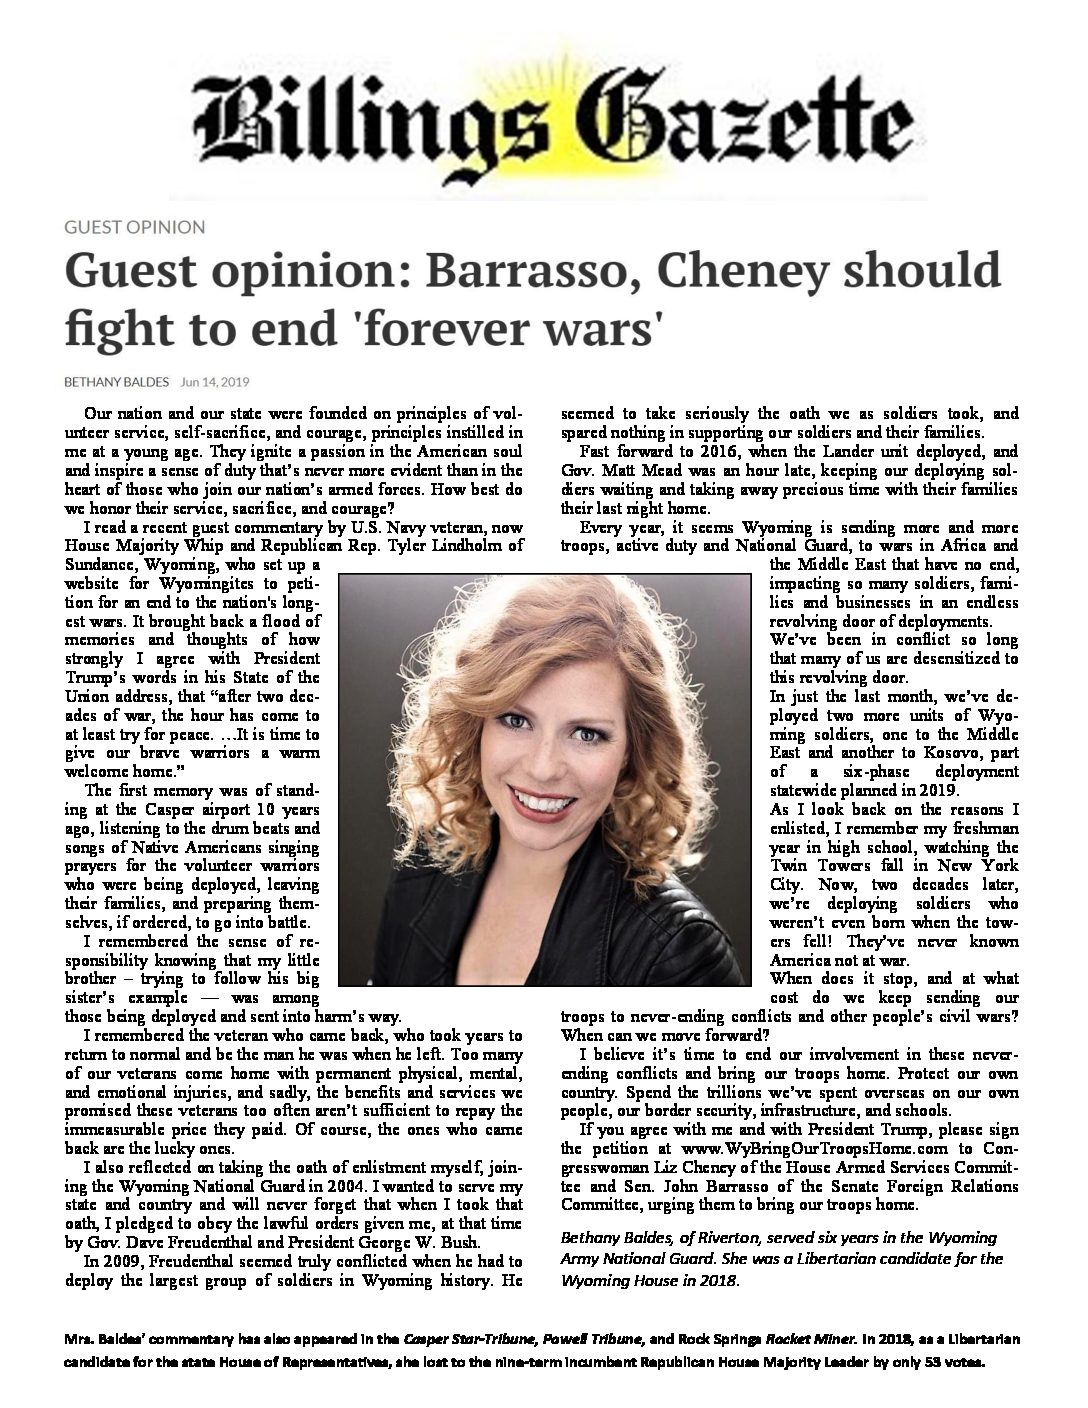 Brasso, Cheney should fight to end ‘forever wars’